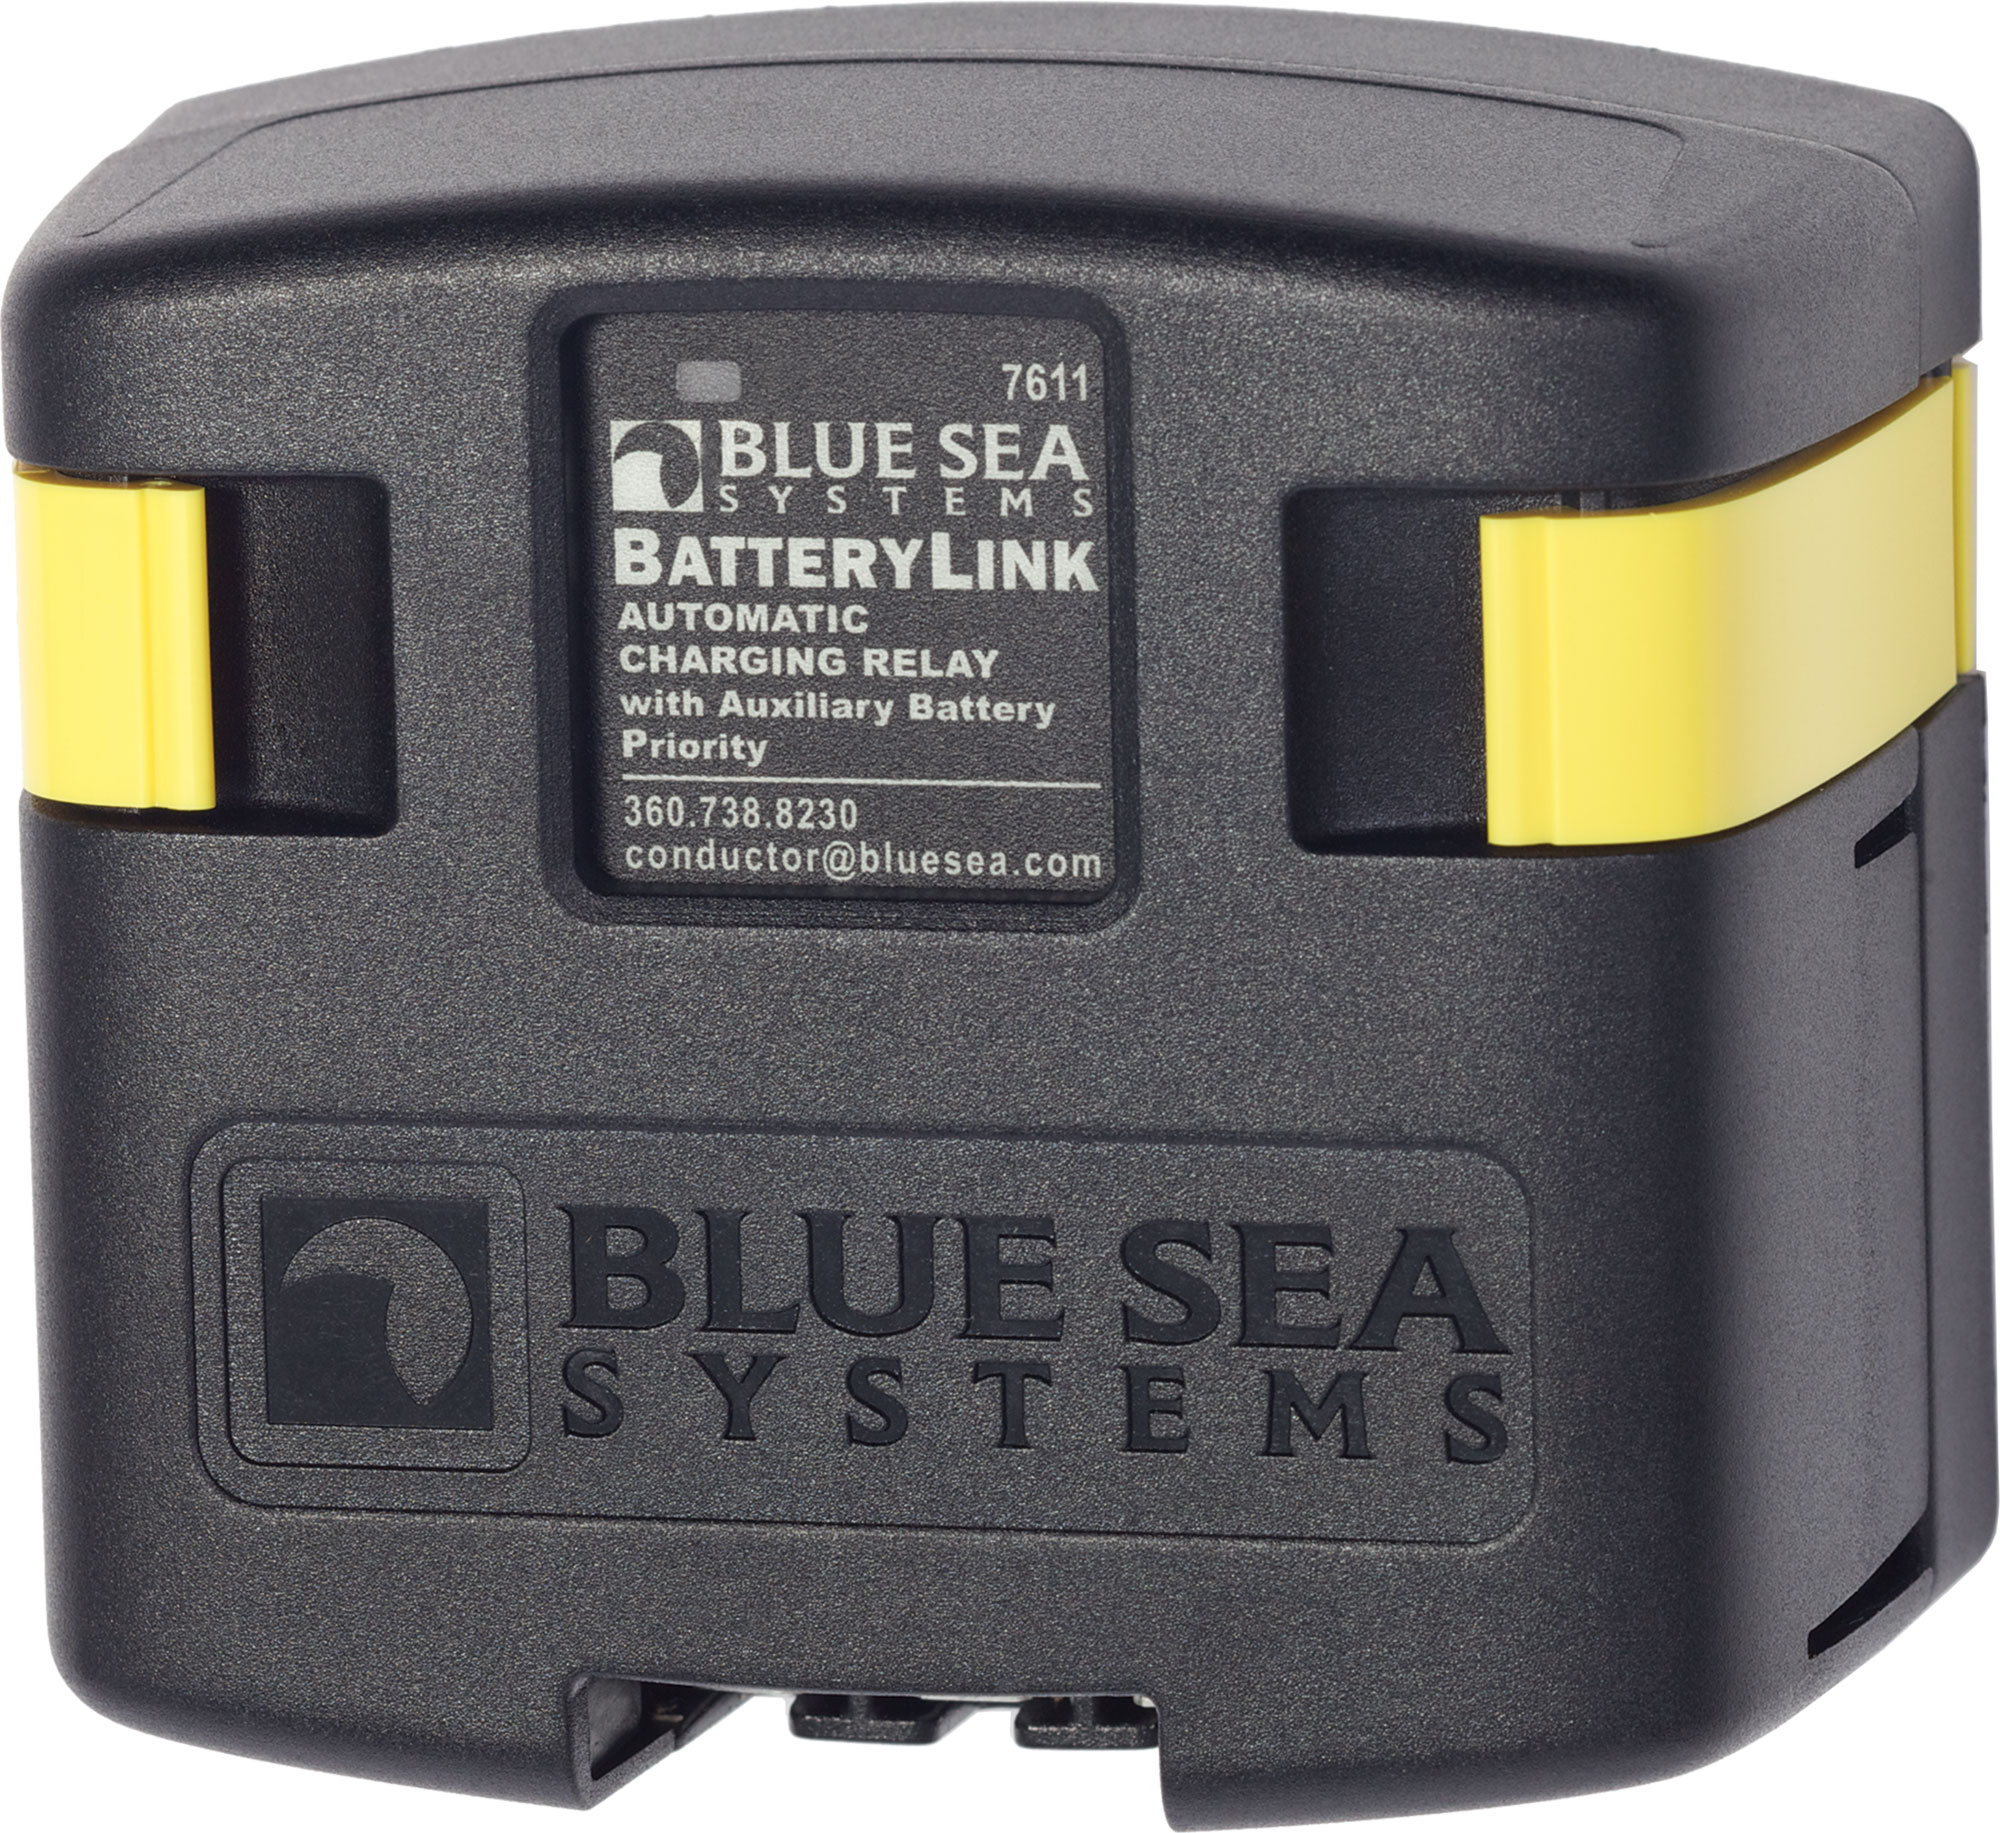 Part # 7611  Manufacturer Blue Sea Systems  Product Type Battery Solenoid